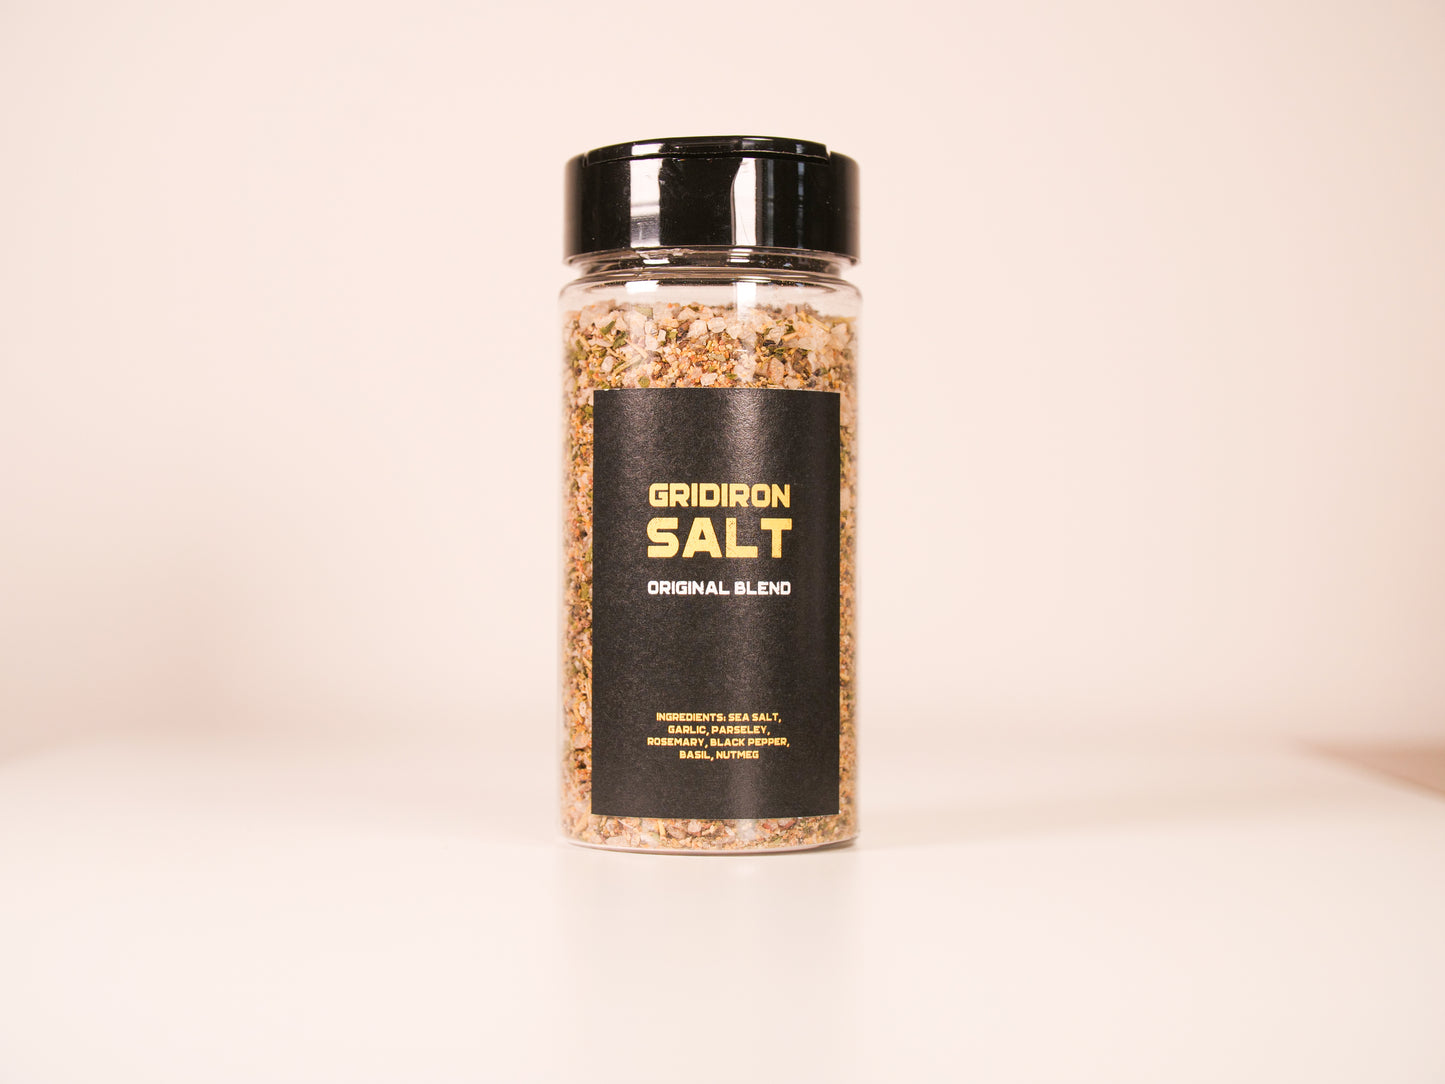 Gridiron Salt - All Blends Collection - Seasoned Sea Salt - All-Purpose - Gourmet Seasonings With Herbs and Spices - All Natural Seasoning for Cooking, For Steak, Fish, Poultry, & More